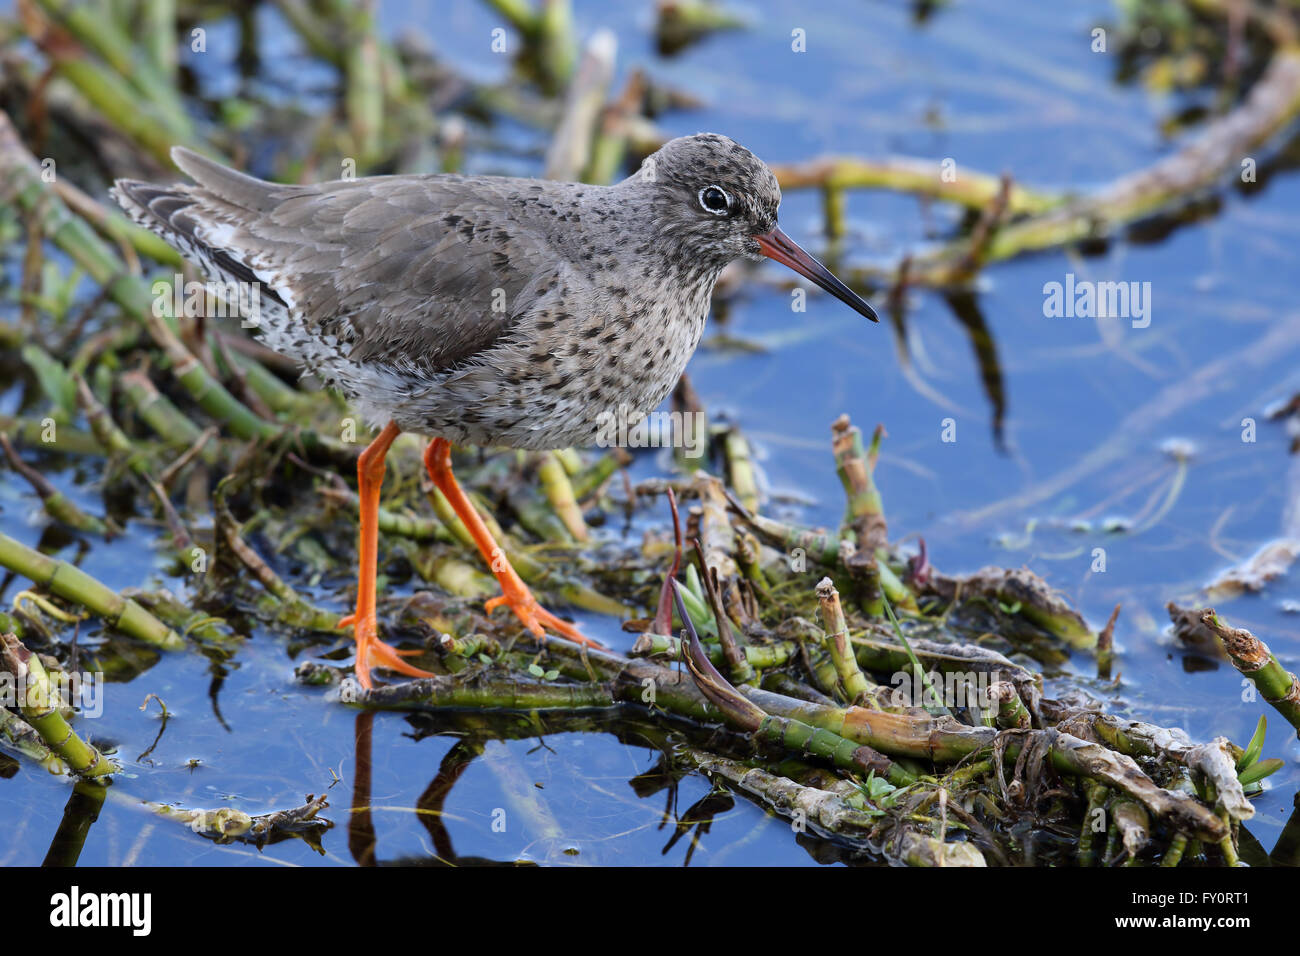 Wild Common Redshank (Tringa totanus) is a Eurasian wader in the large family Scolopacidae. Stood amongst a bogbean plant. Stock Photo